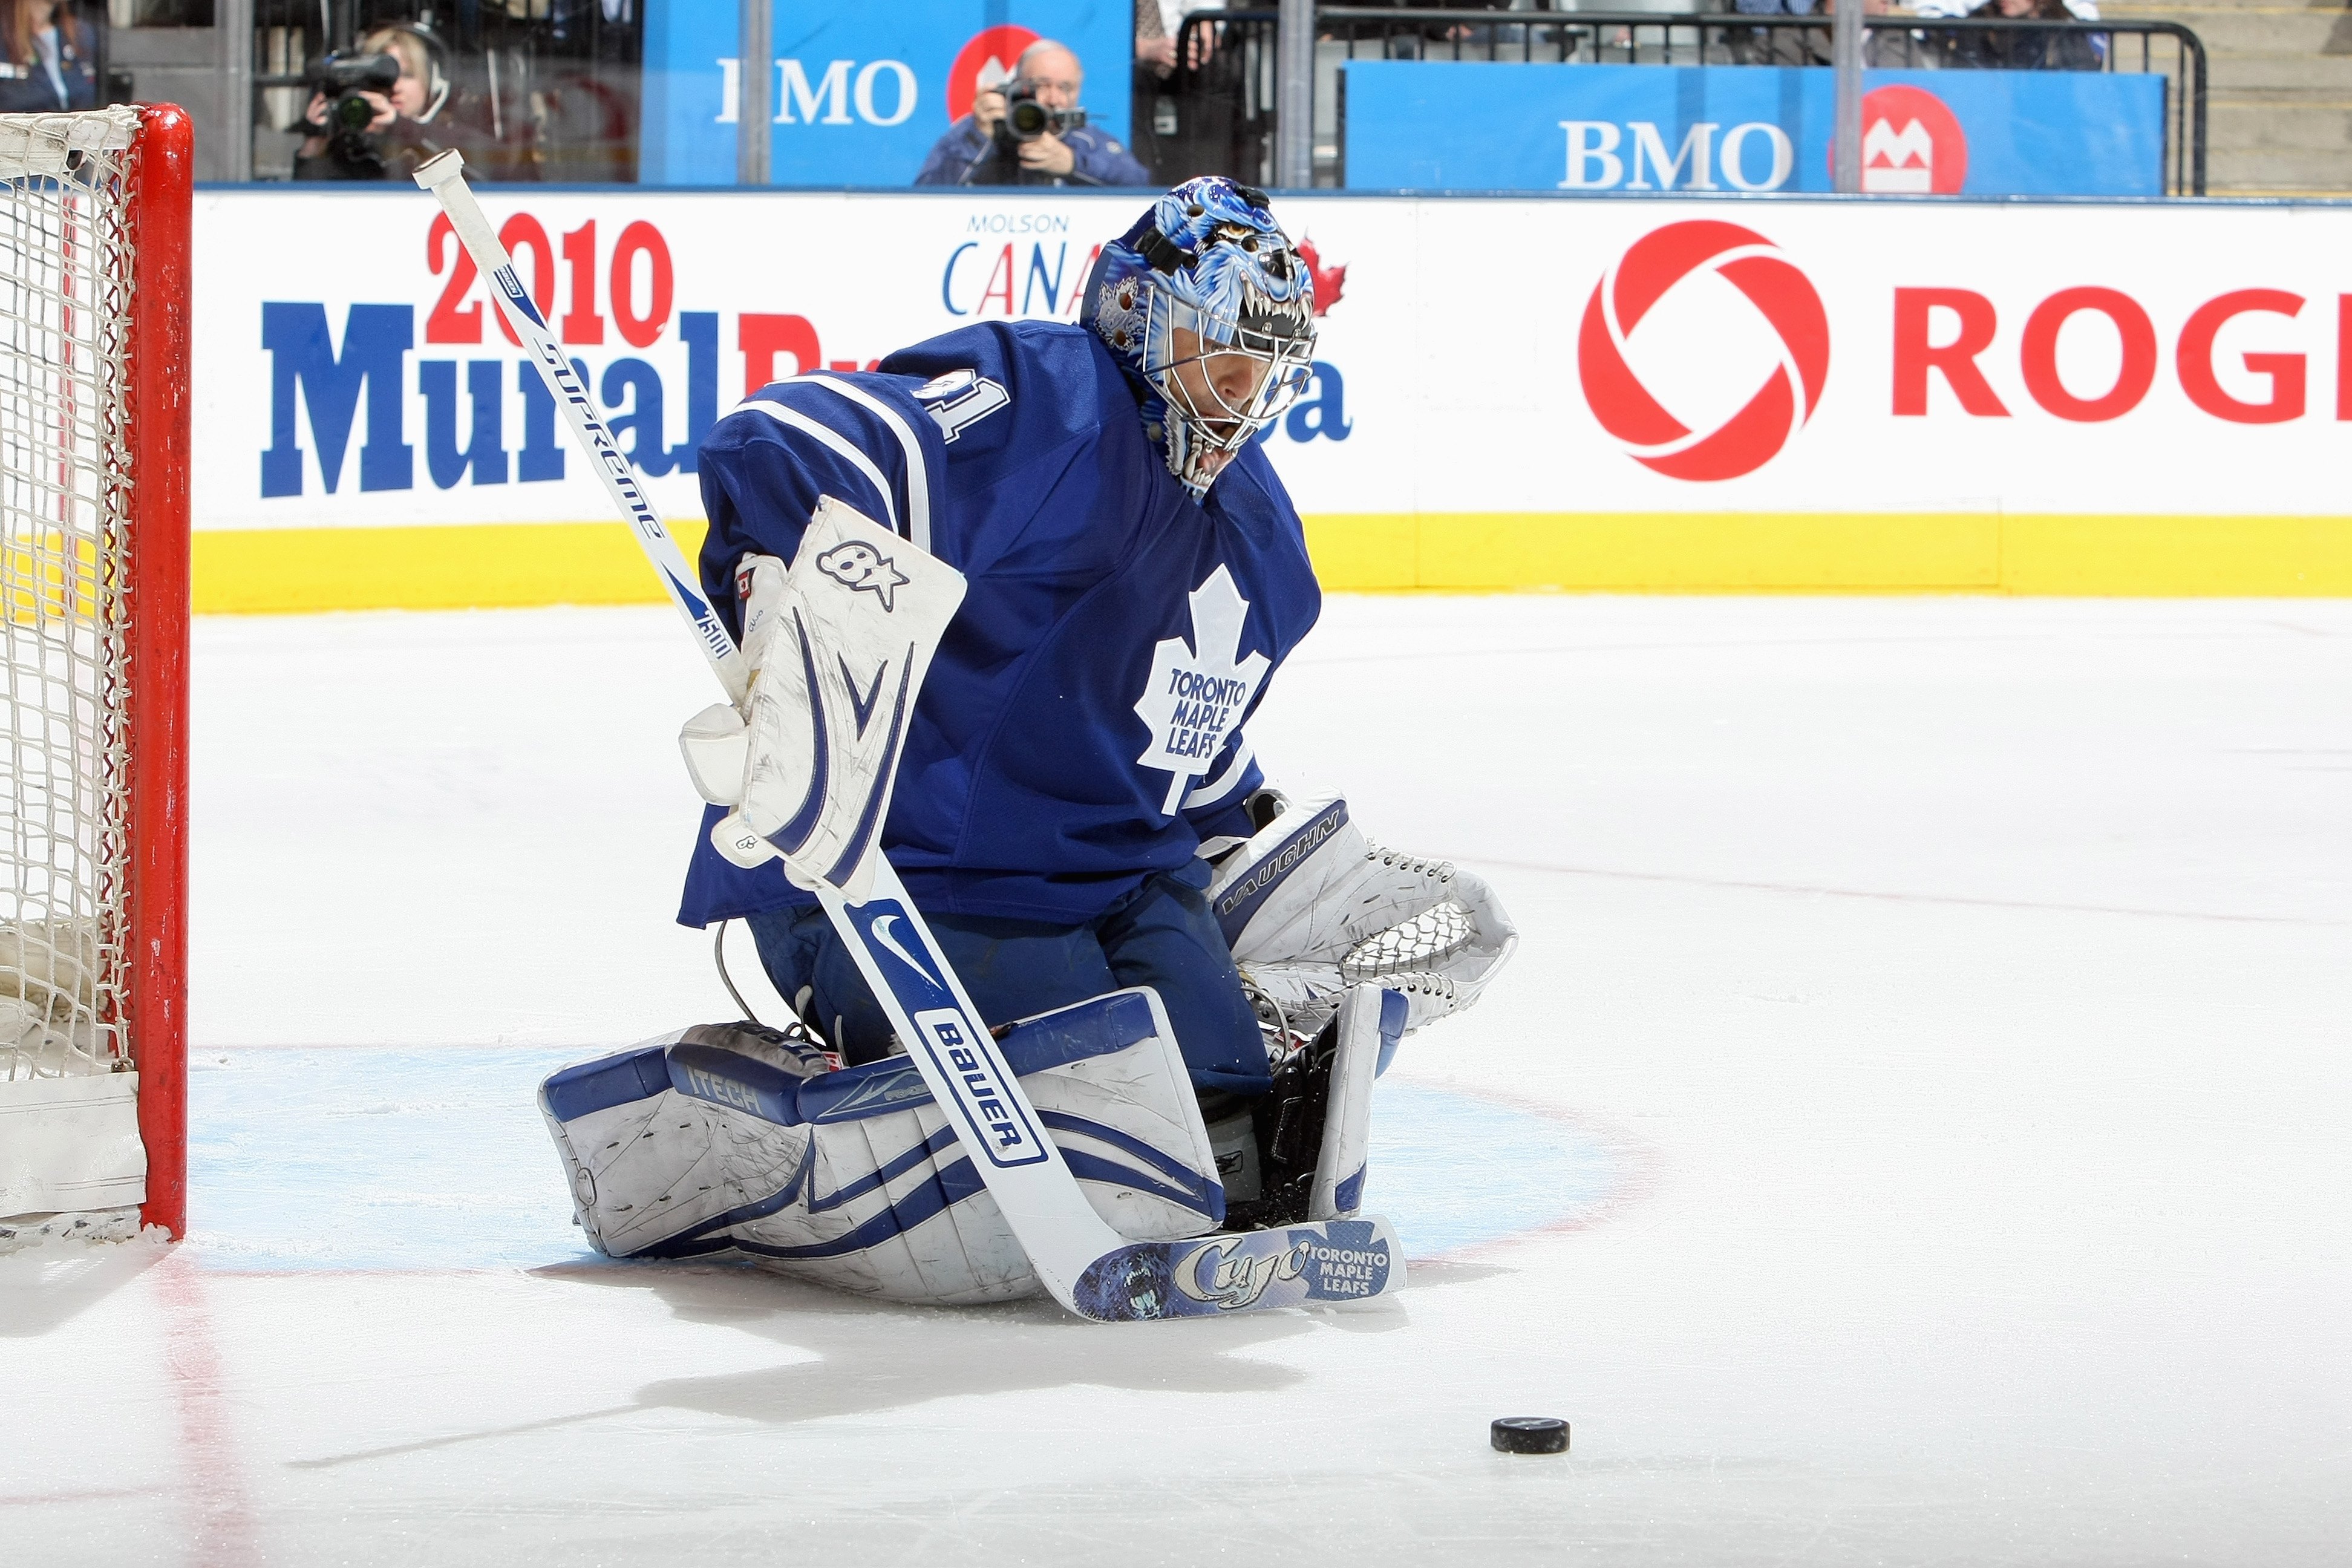 TORONTO - APRIL 8: Goalie Curtis Joseph #31 of the Toronto Maple Leafs stops the puck against the Buffalo Sabres during their NHL game at the Air Canada Centre on April 8, 2009 in Toronto, Ontario. (Photo by: Dave Sandford/Getty Images)